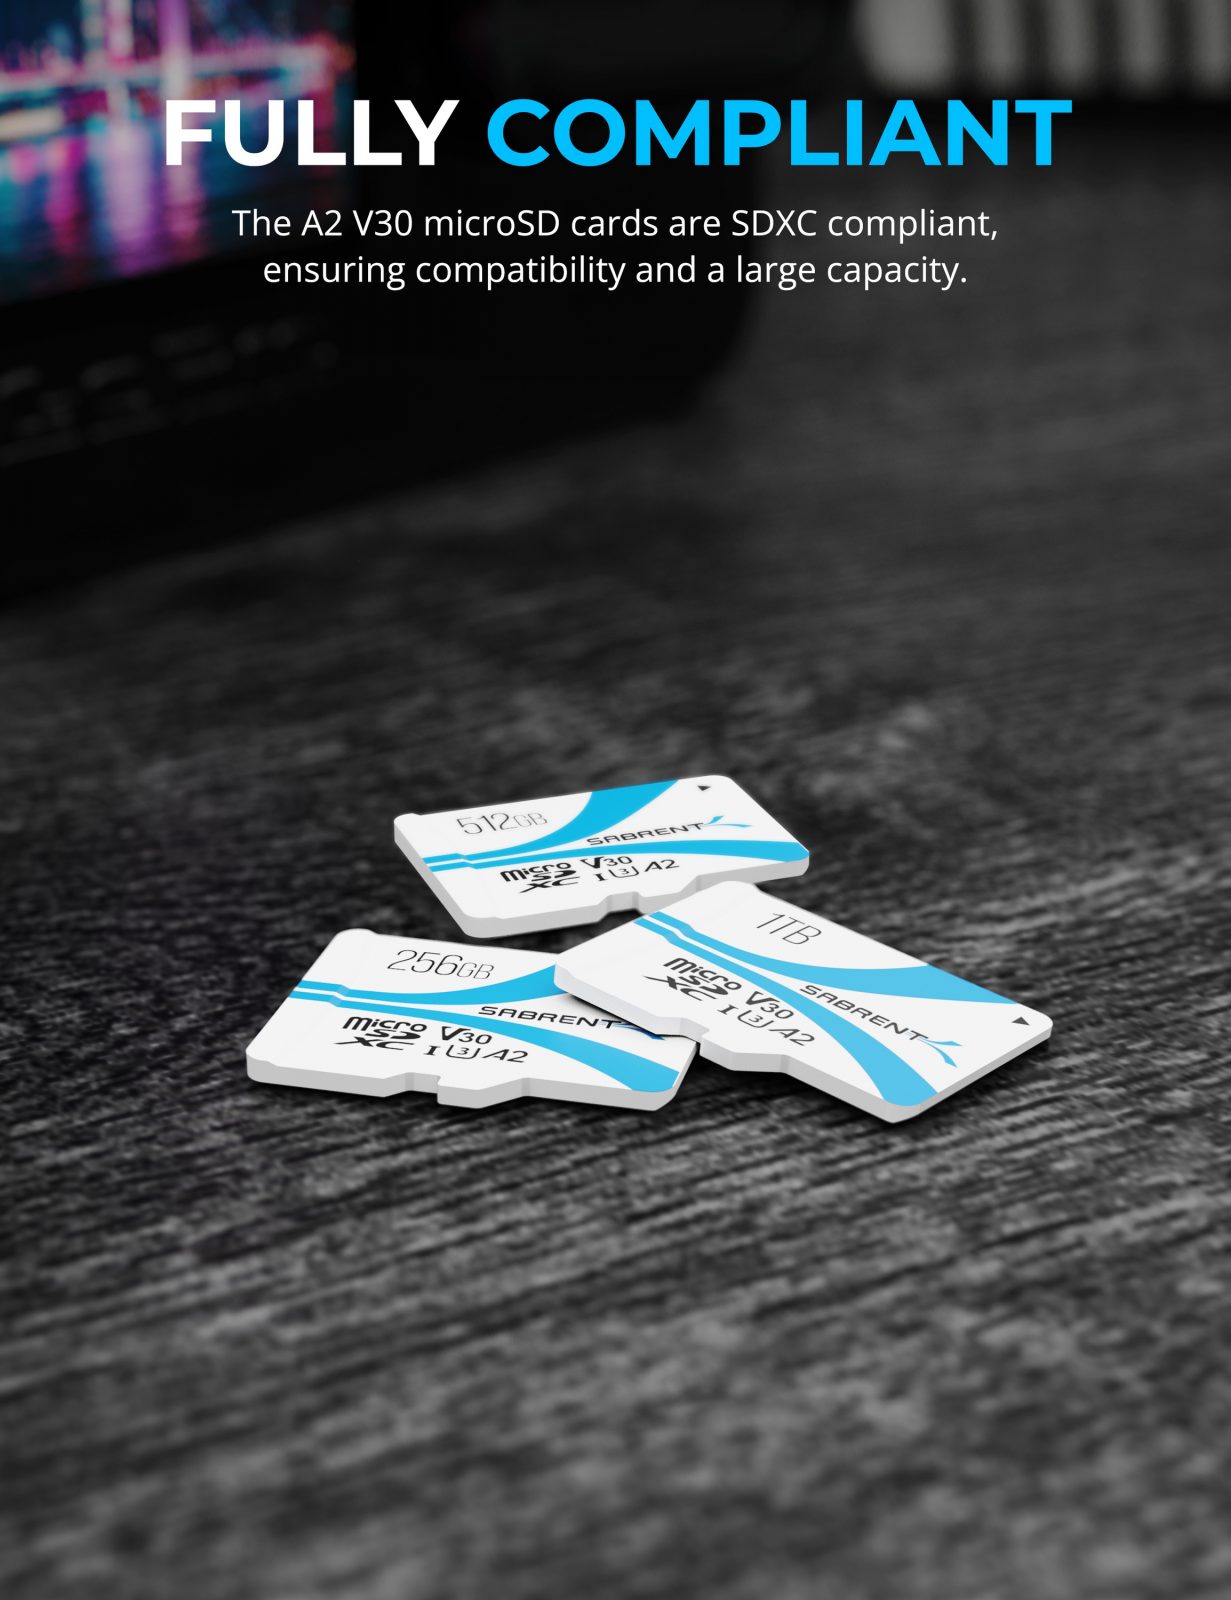 Sabrent: here is the launch of the new line of microSDXC cards